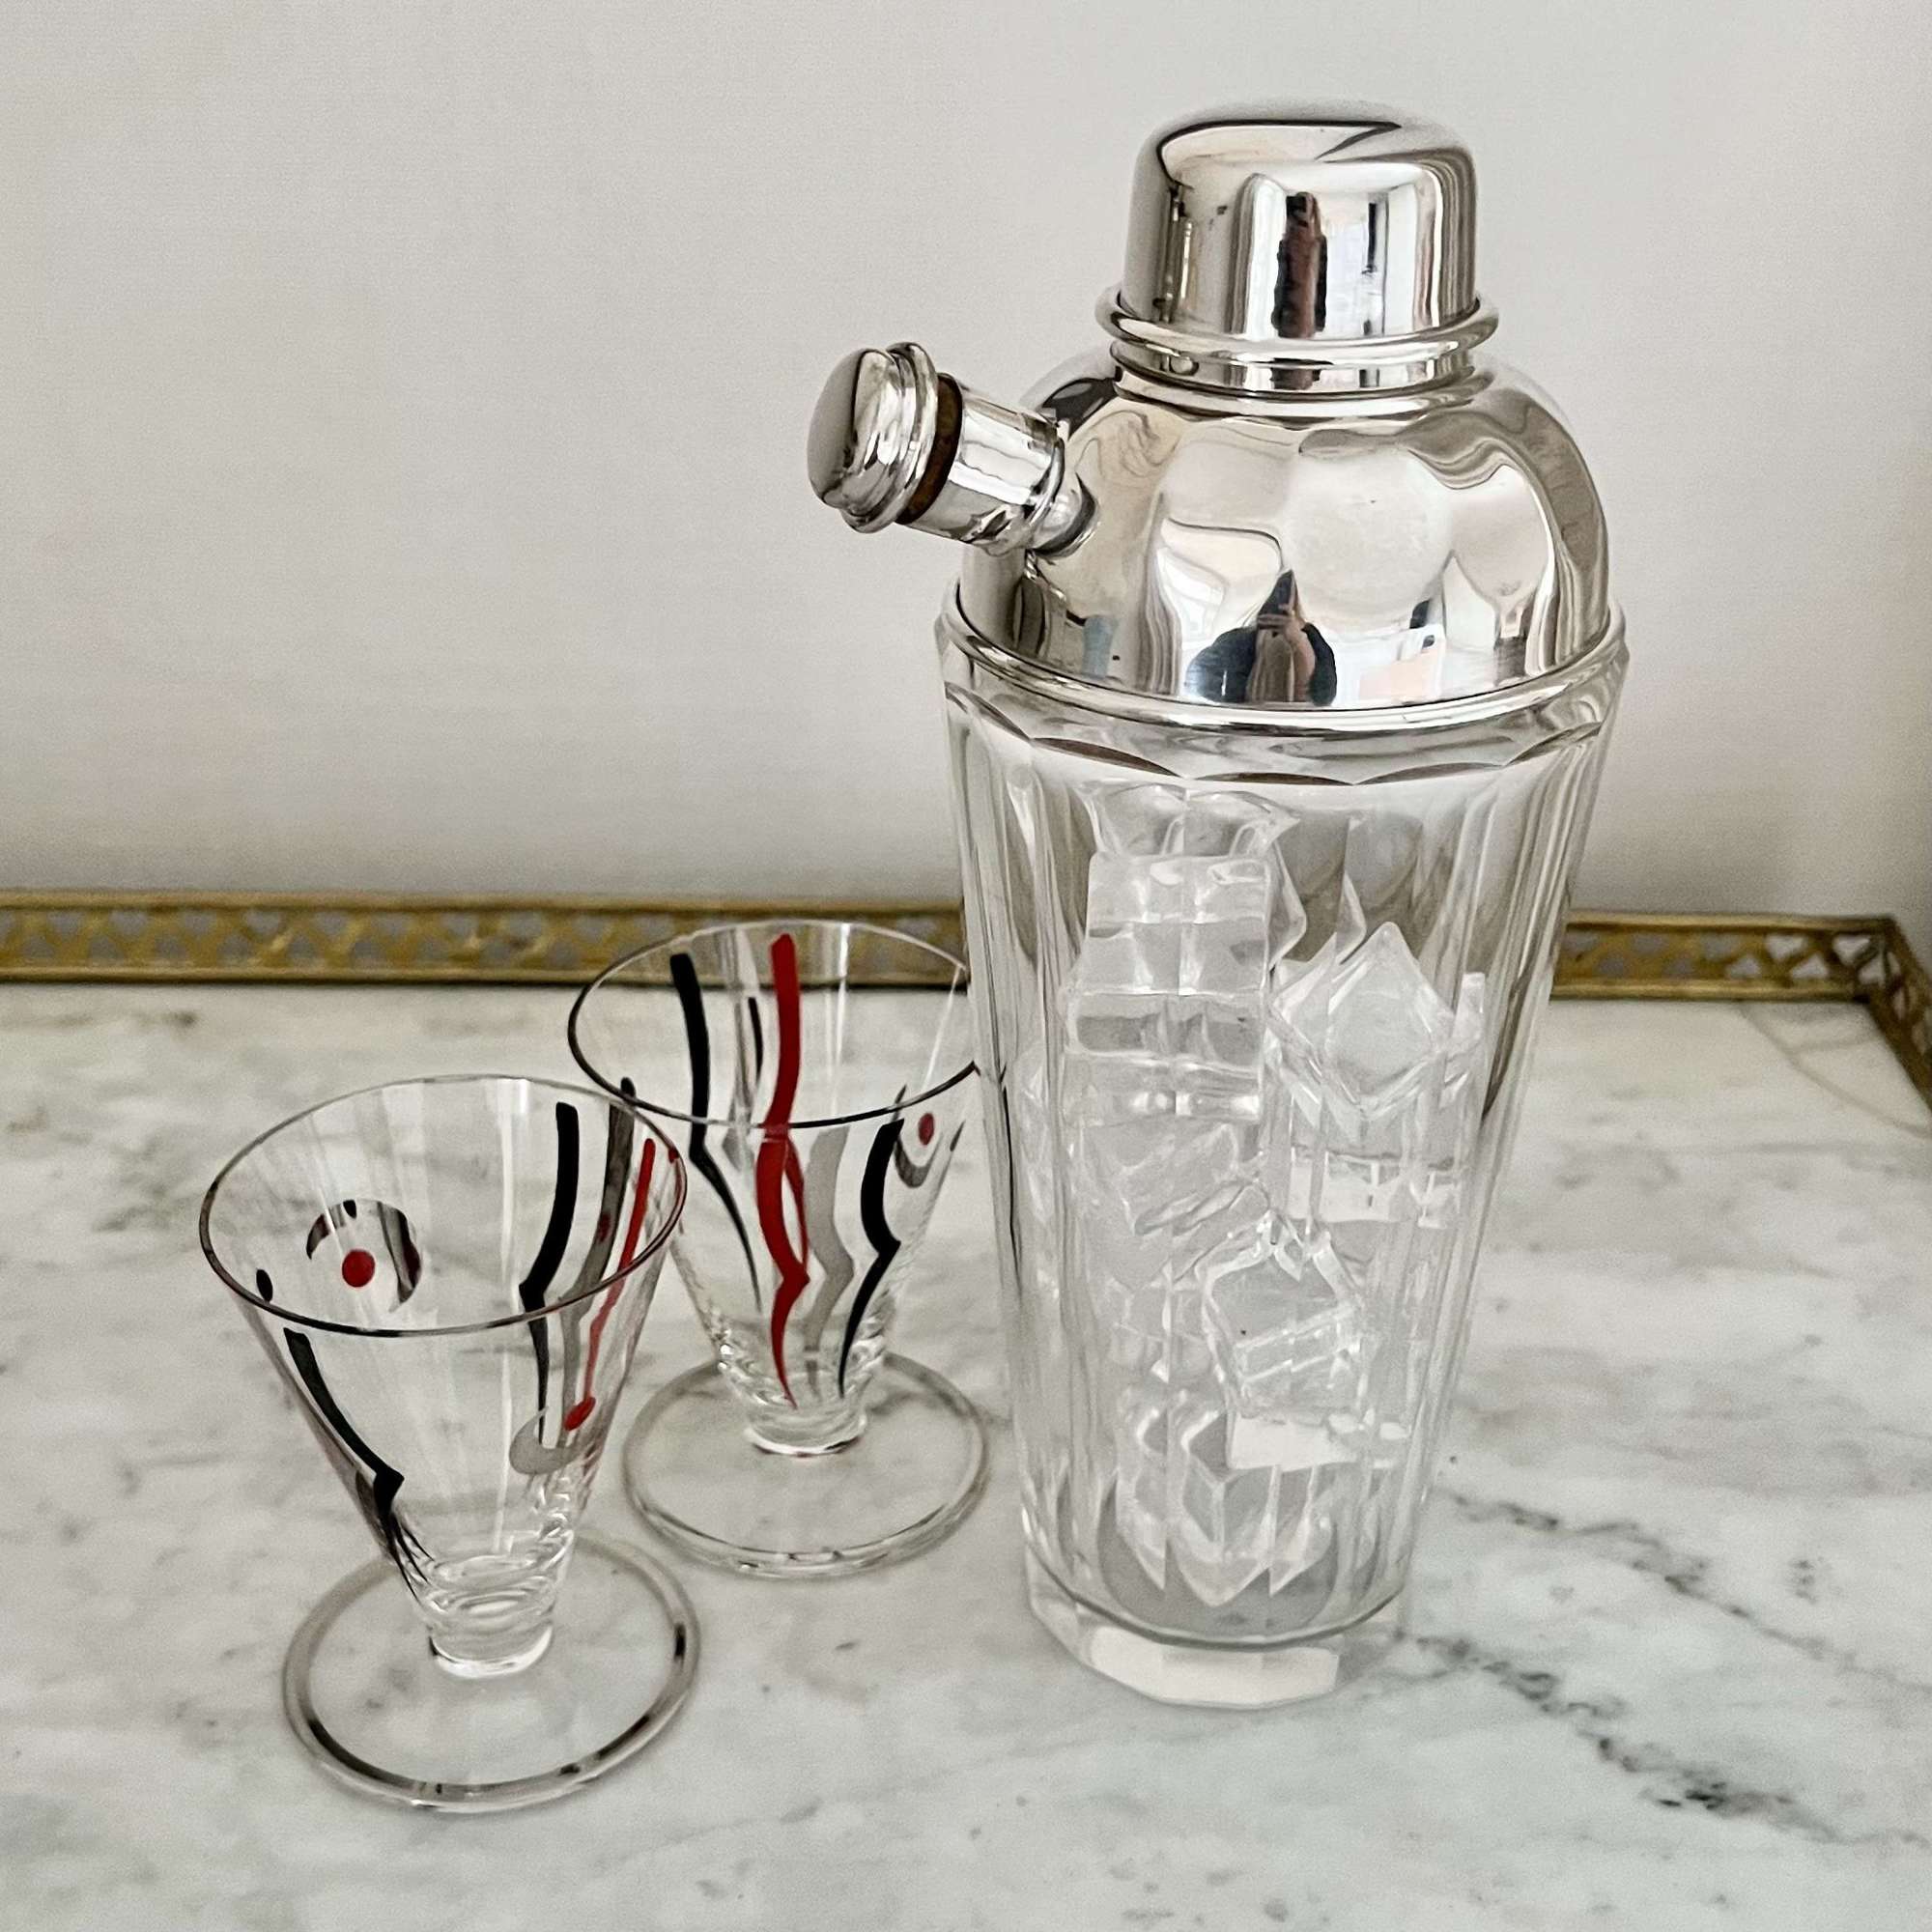 English Glass And Silver Plated Cocktail Shaker With Cork Stopper